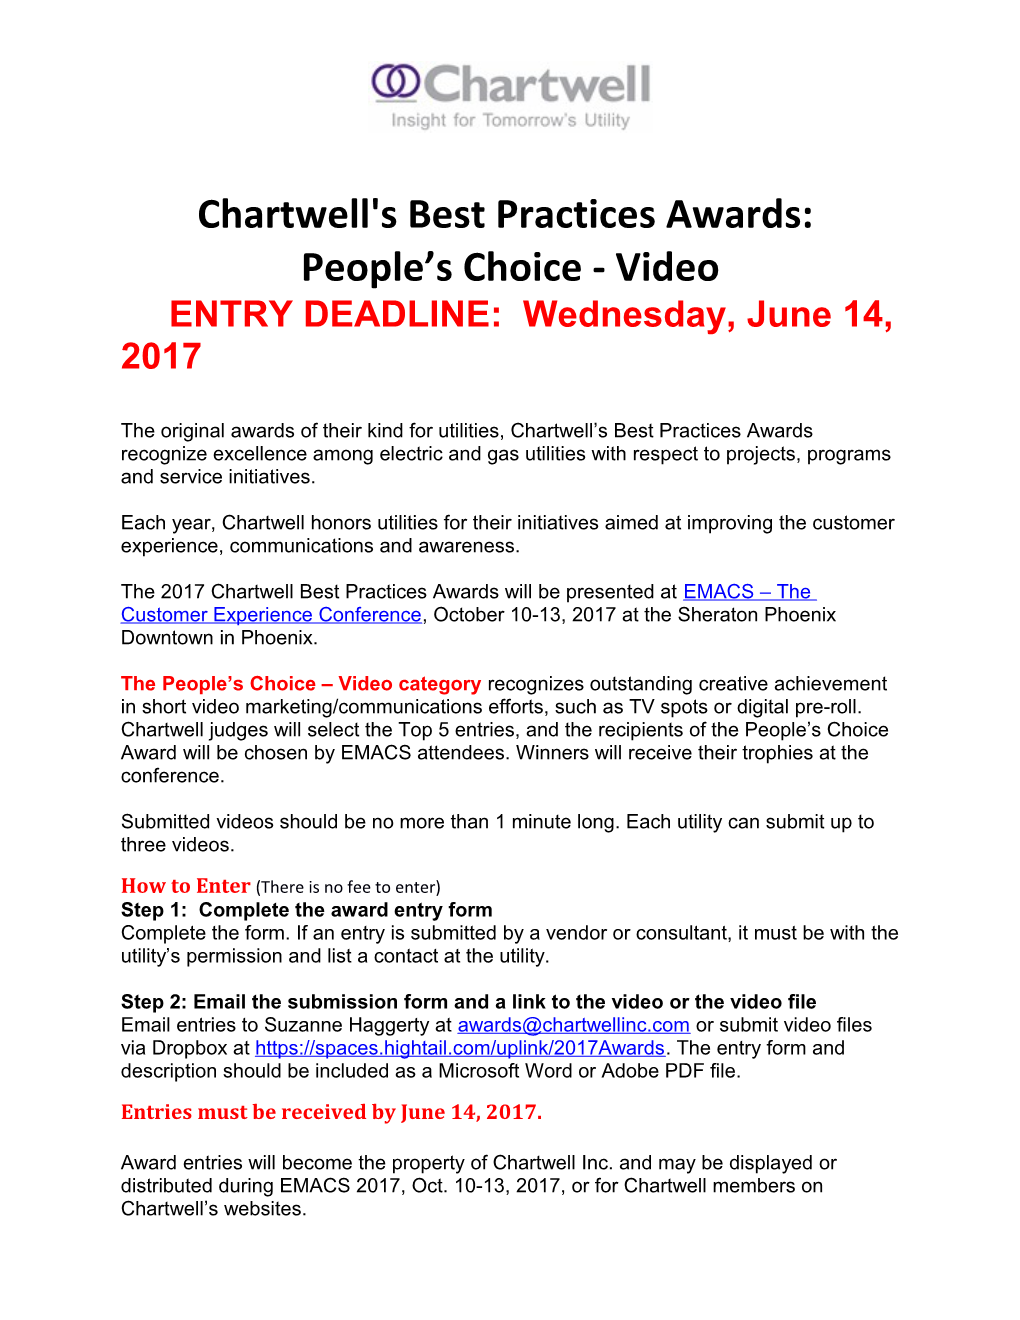 Chartwell's Best Practices Awards: People S Choice - Video